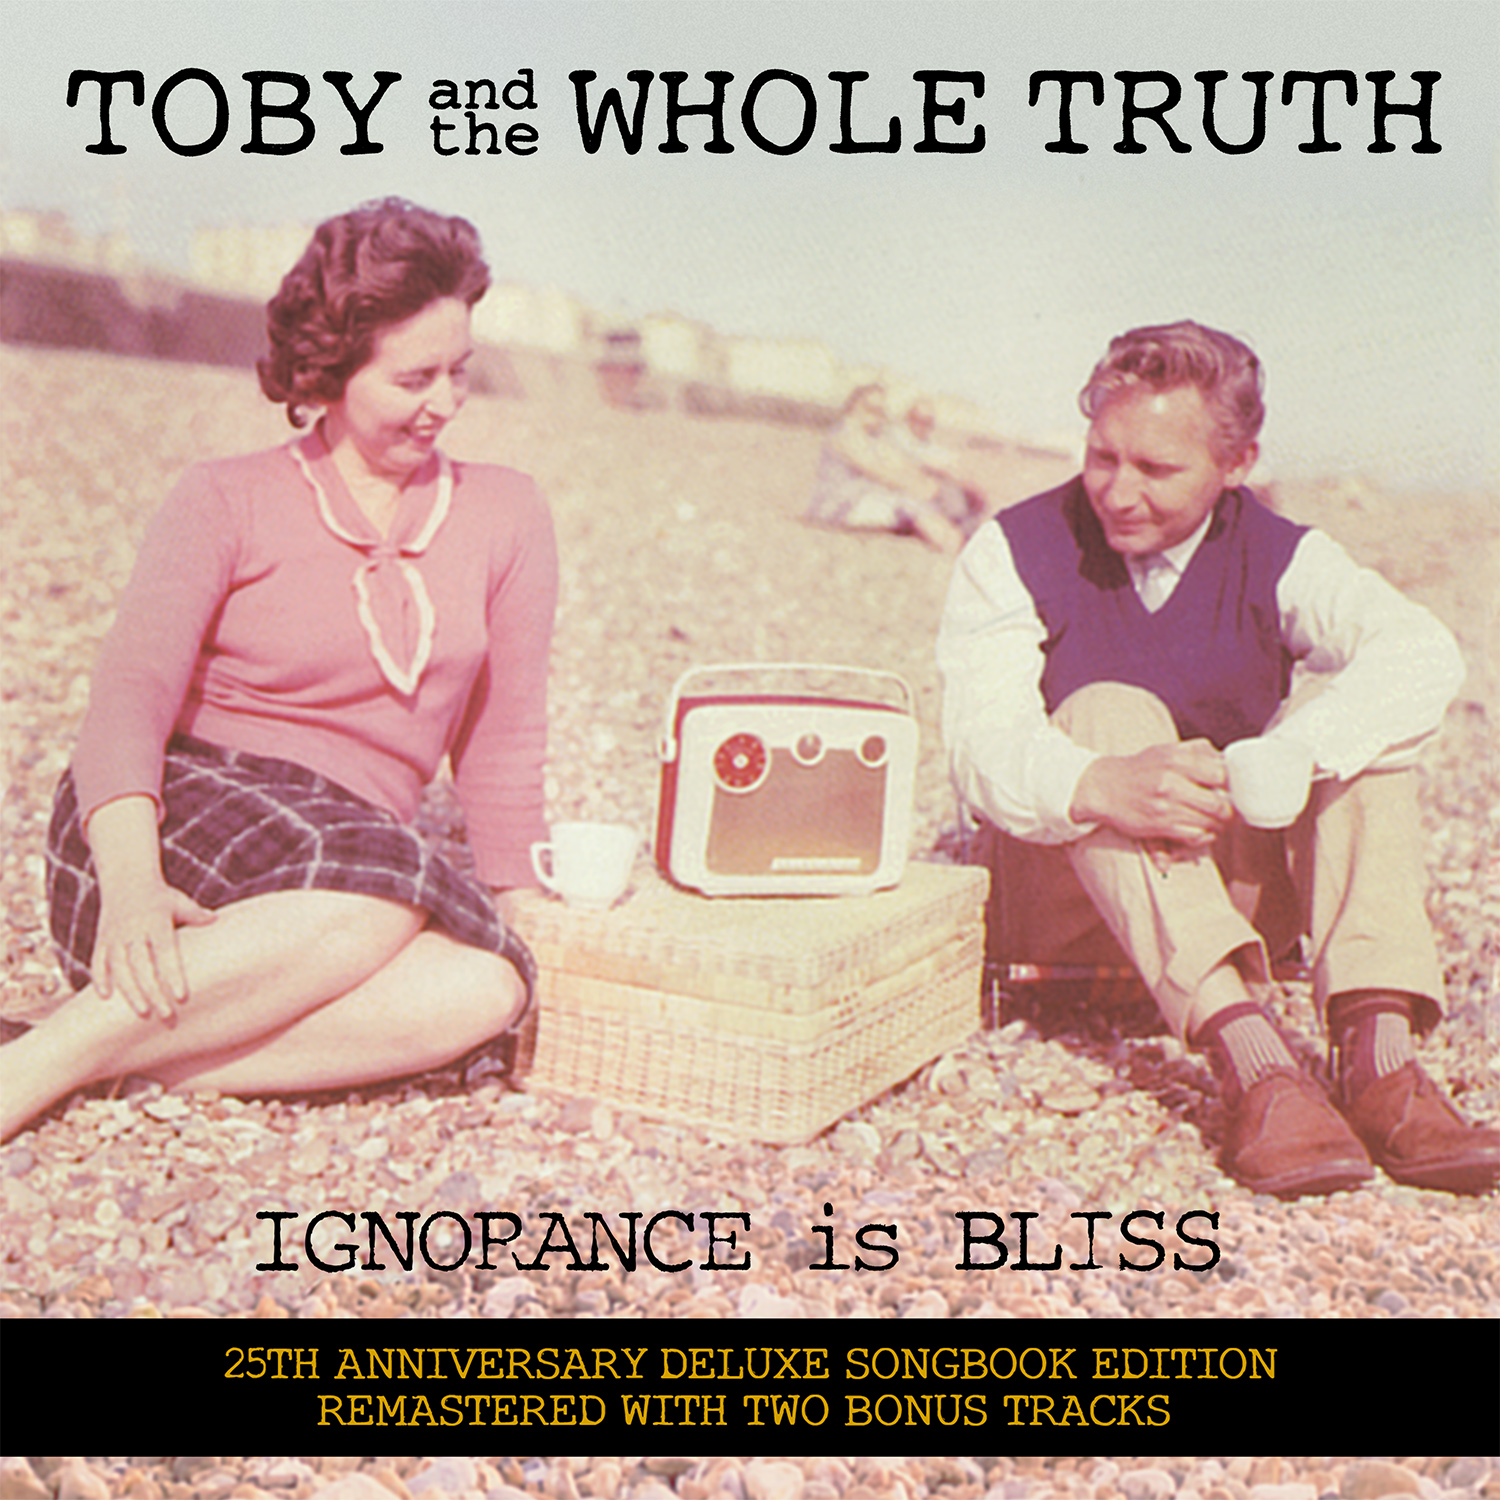 Artwork for "Ignorance Is Bliss" by Toby Jepson. 